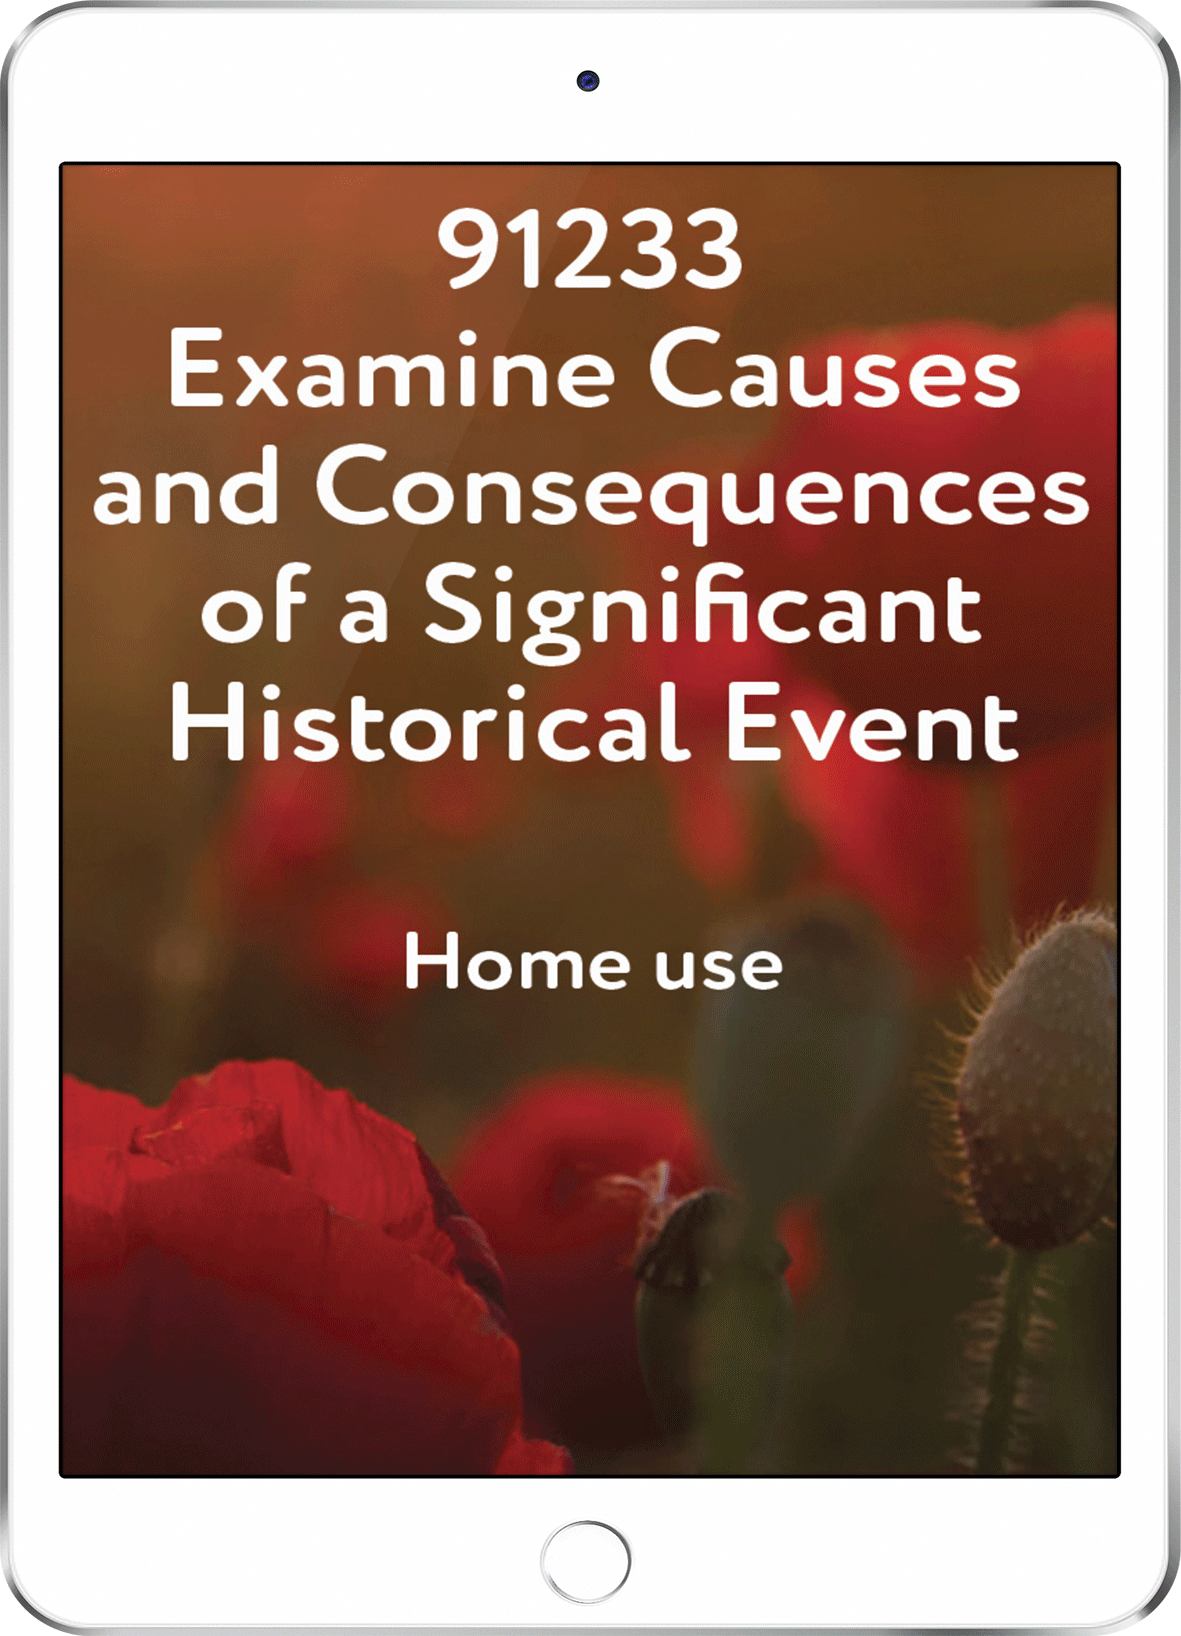 91233 Examine Causes and Consequences of a Significant Historical Event - Home Use